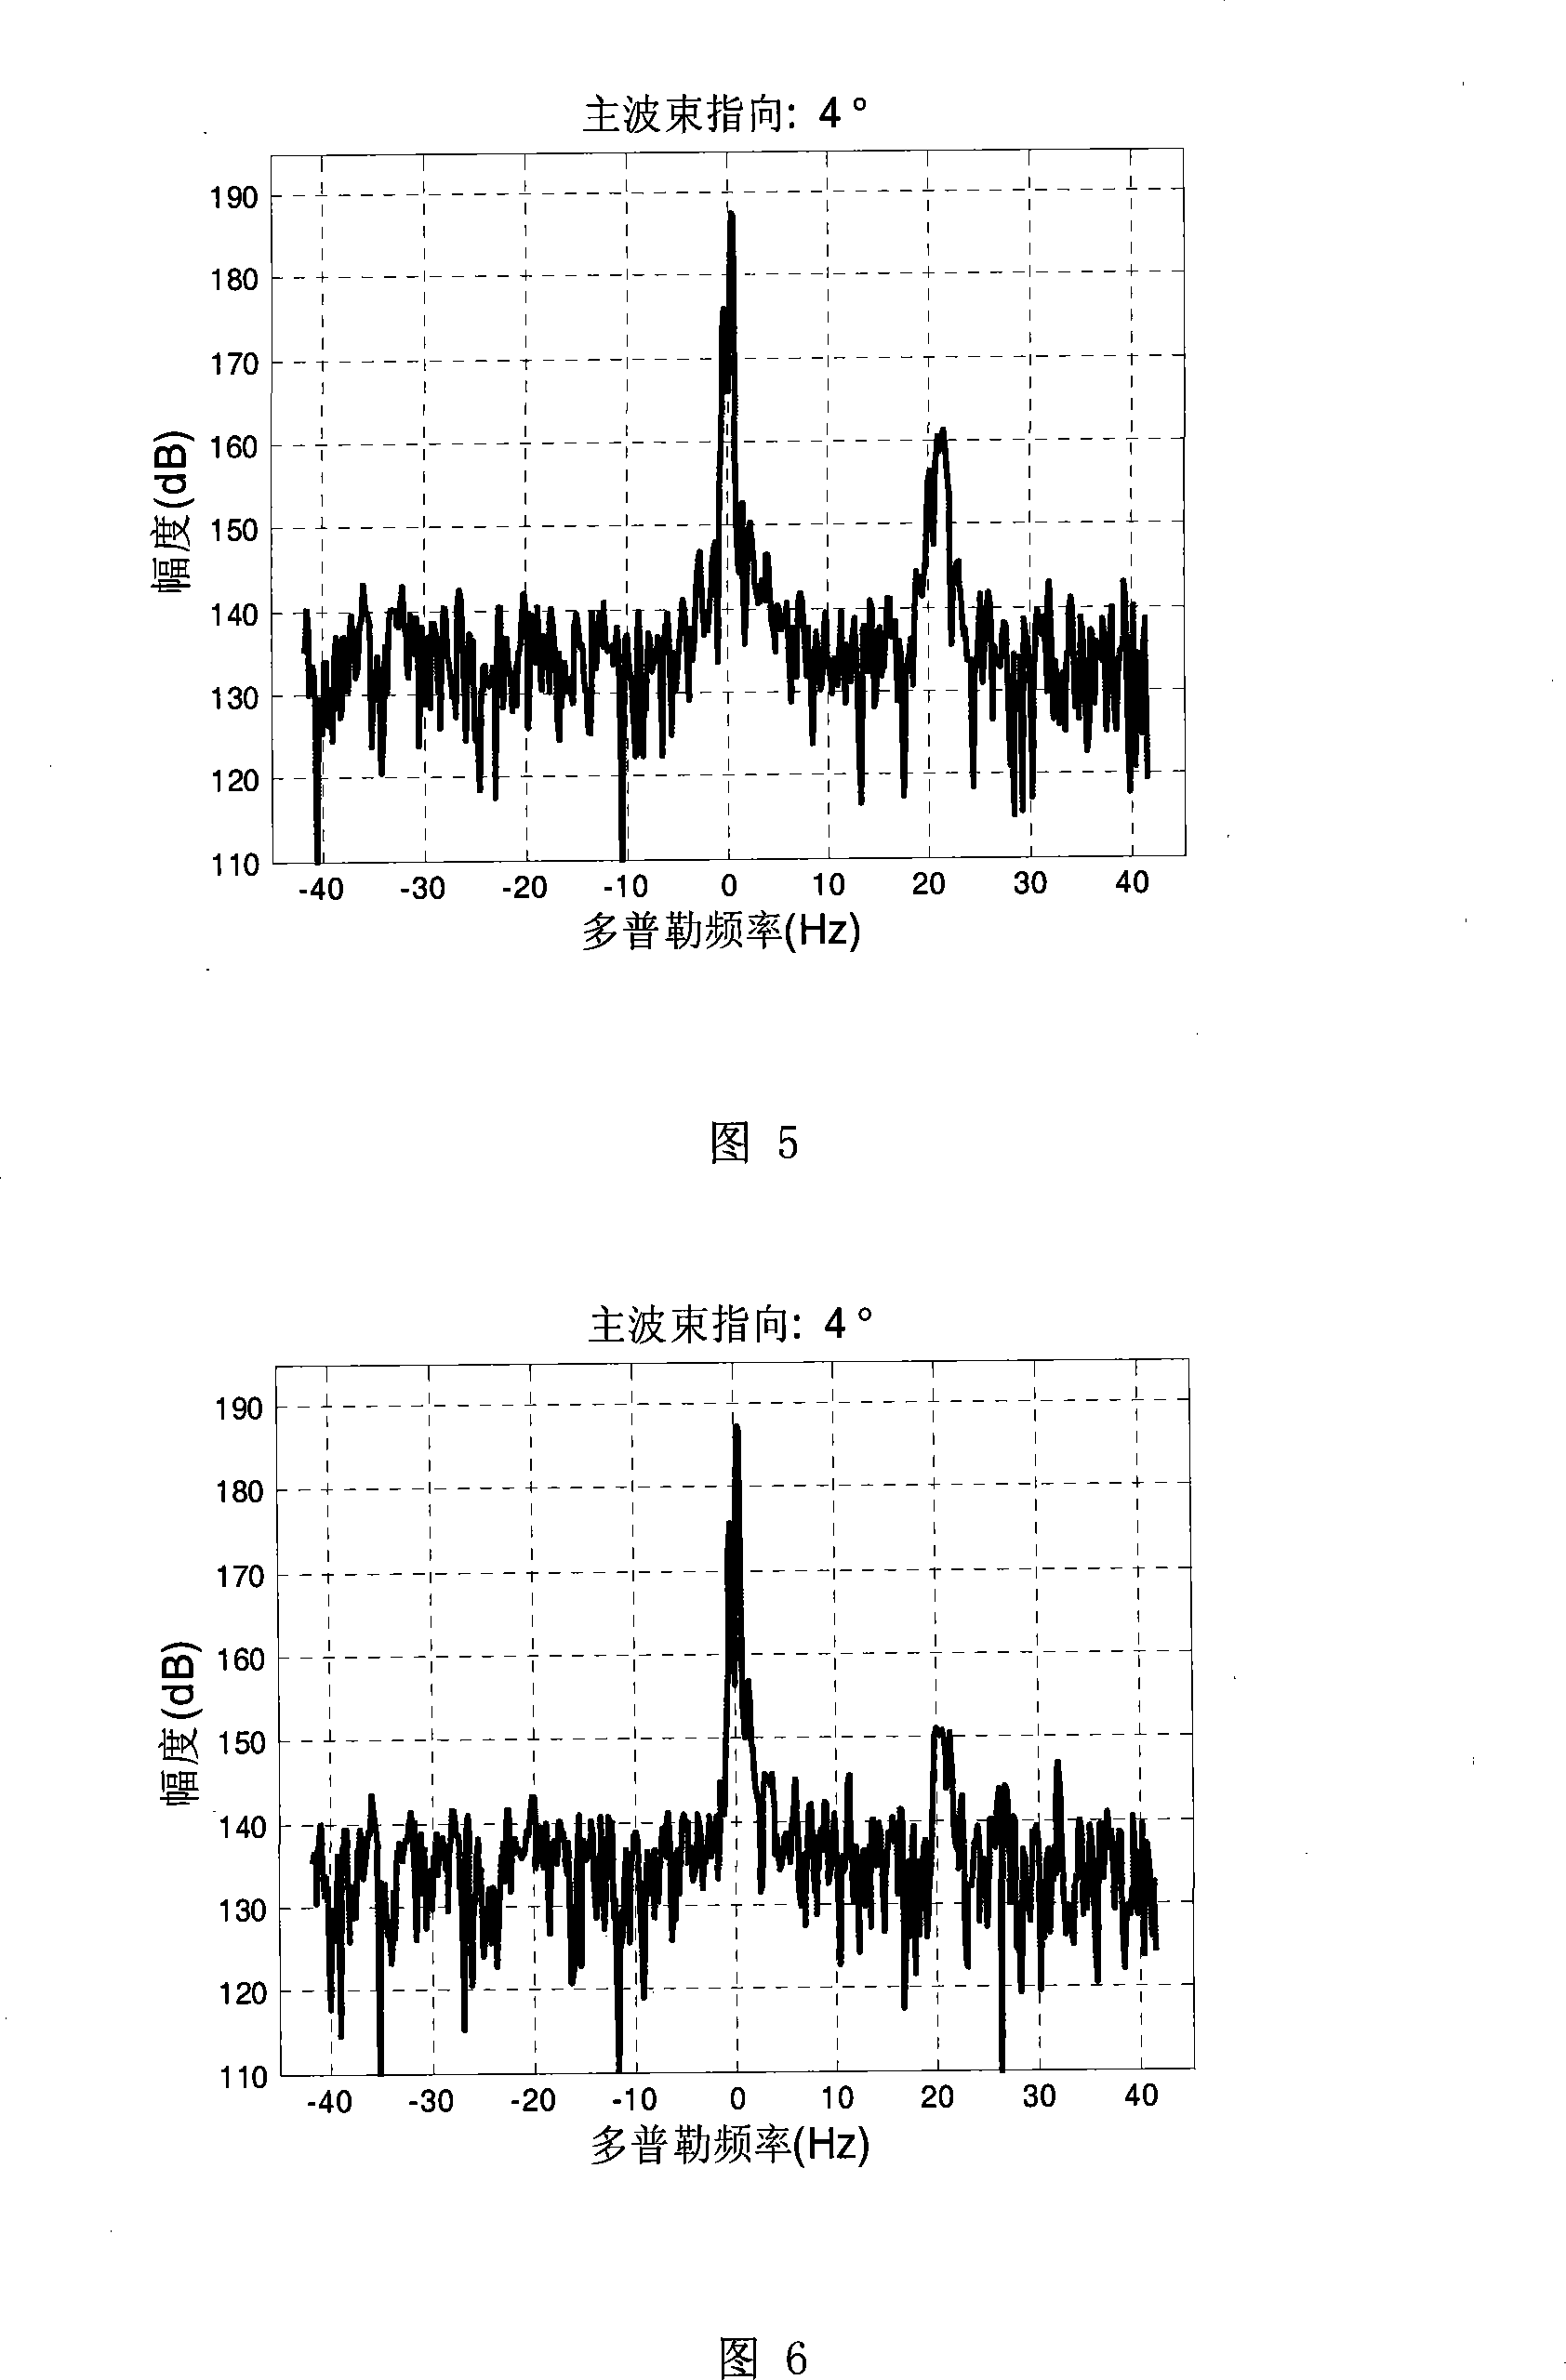 Sky wave over-the-horizon radar self-adaption interference rejection method based on sidelobe constraint